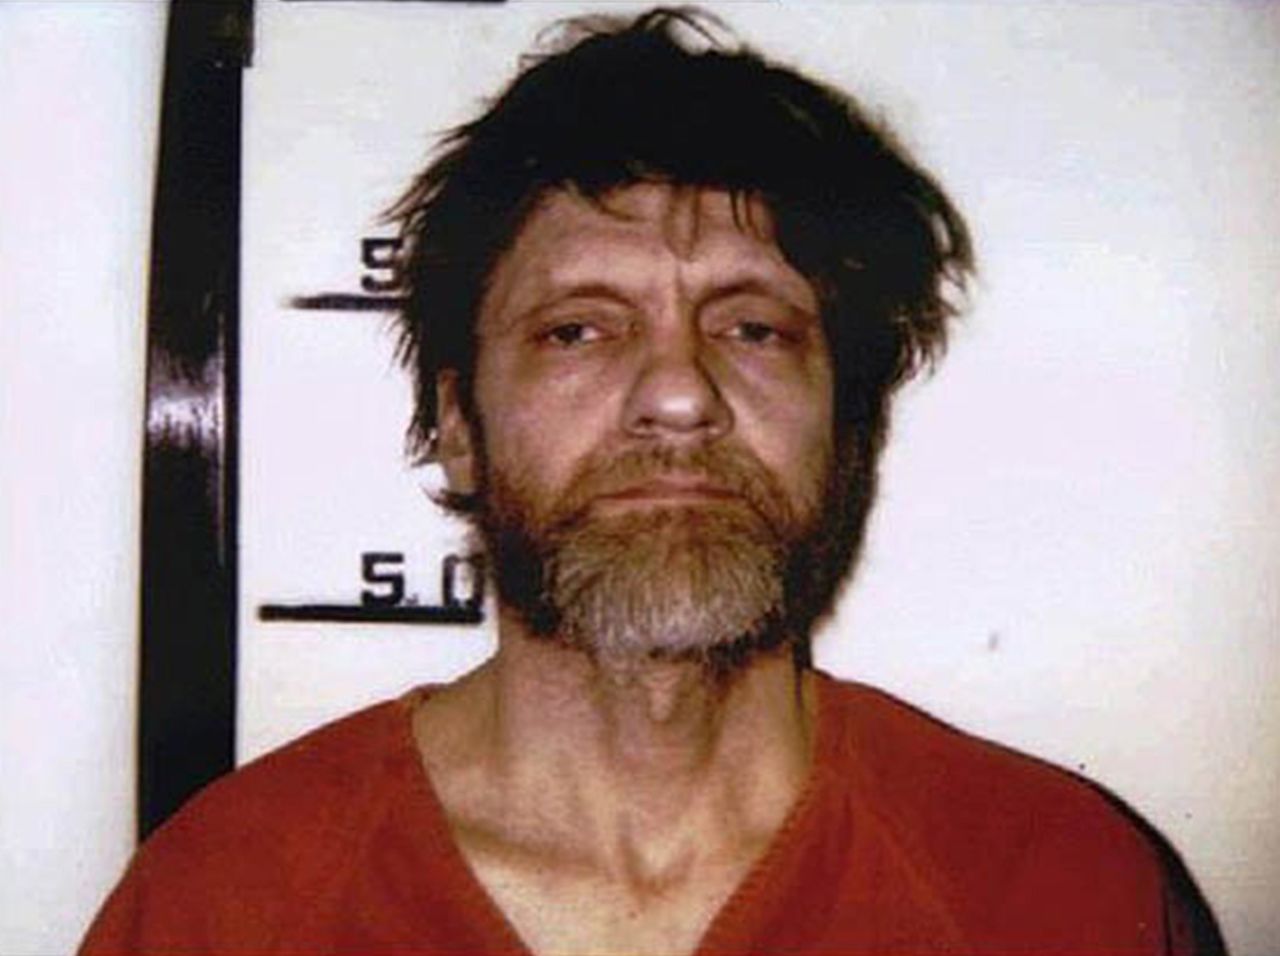 Ted Kaczynski, also known as the Unabomber, received multiple life sentences for <a href="https://www.cnn.com/2012/05/24/us/massachusetts-harvard-unabomber/" target="_blank">mail bombings</a> that killed three people and wounded 23 others between 1978 and 1995. 